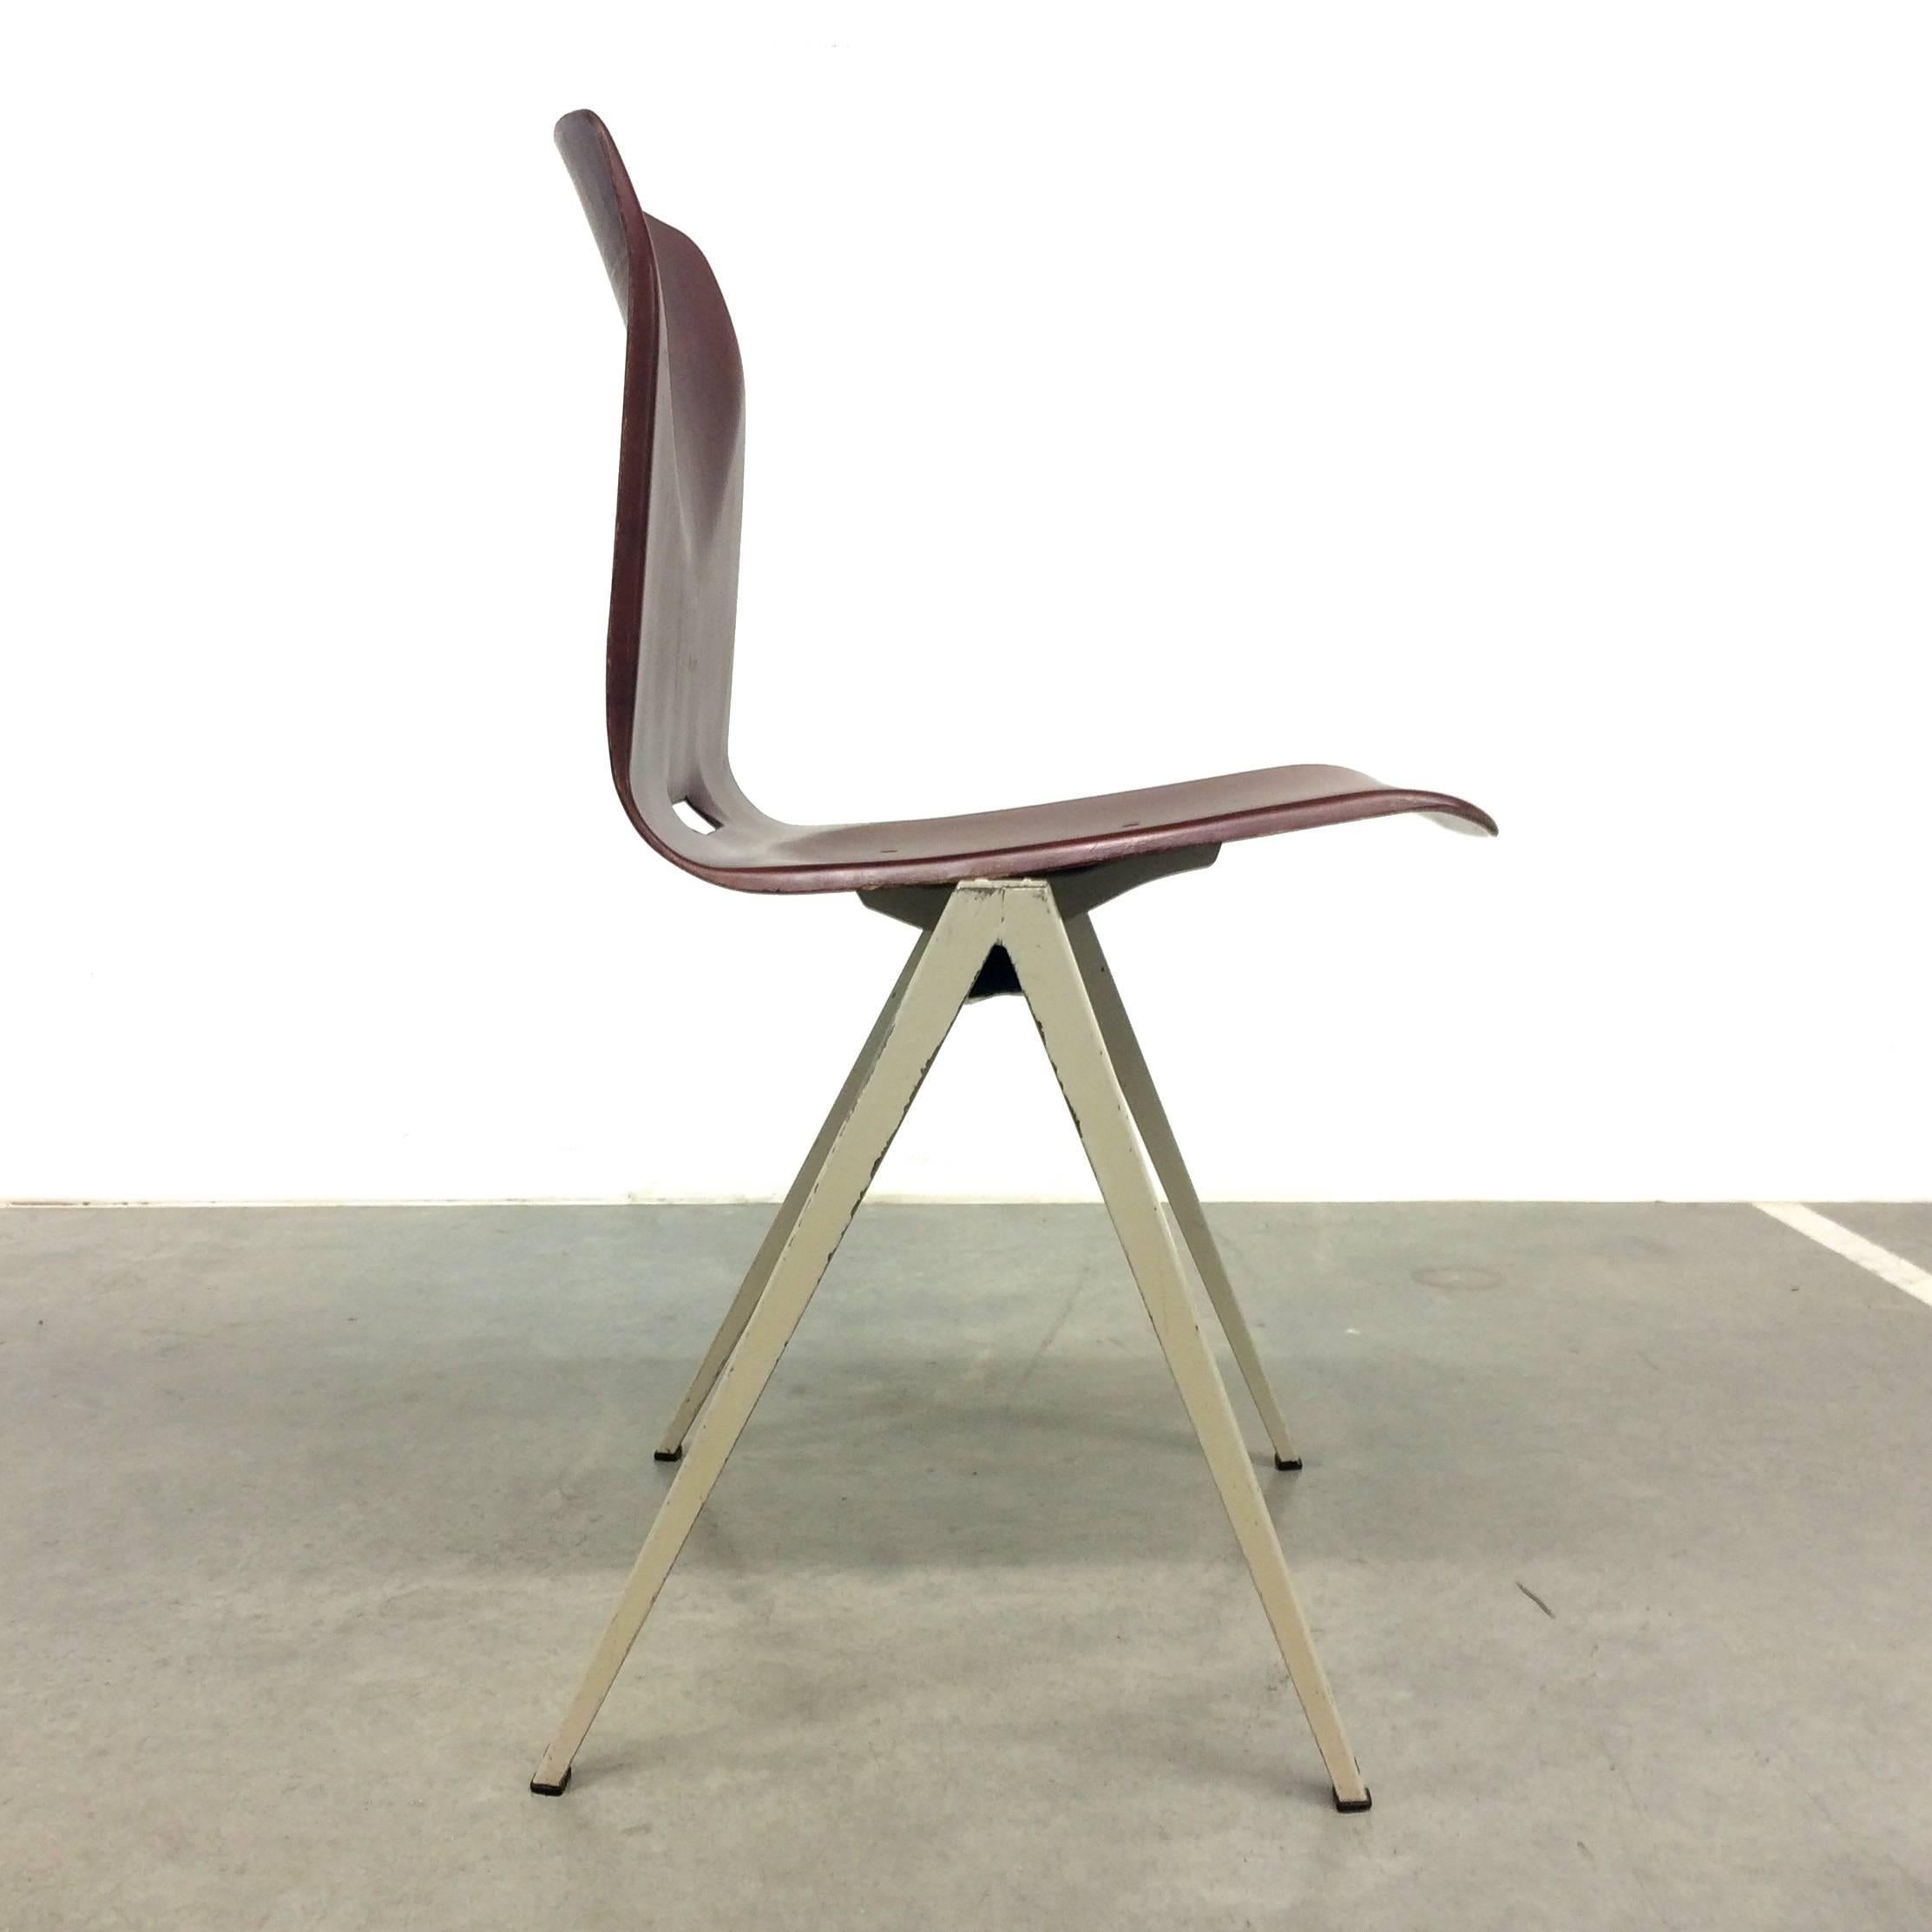 Painted Six Dutch Industrial Design Stacking Chairs from the 1960s For Sale